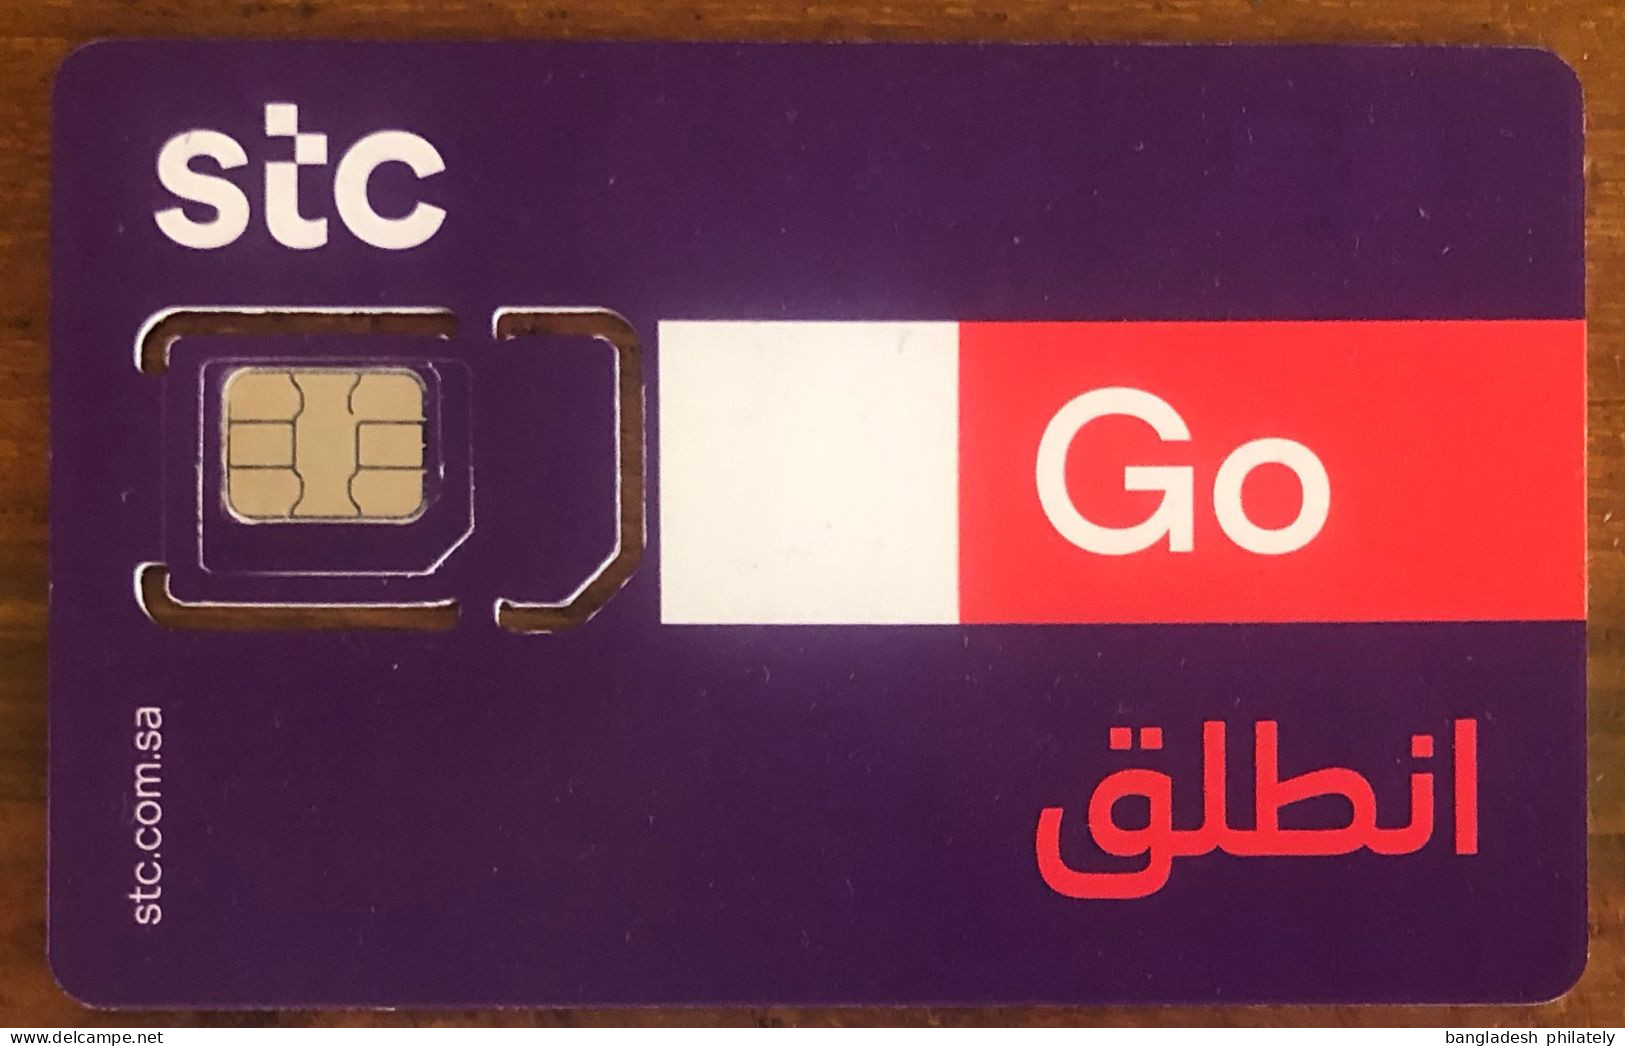 Saudi Arabia STC Mobile Large Size GSM Nano SIM Card Telecom Tele Communication See my other listing with more cards